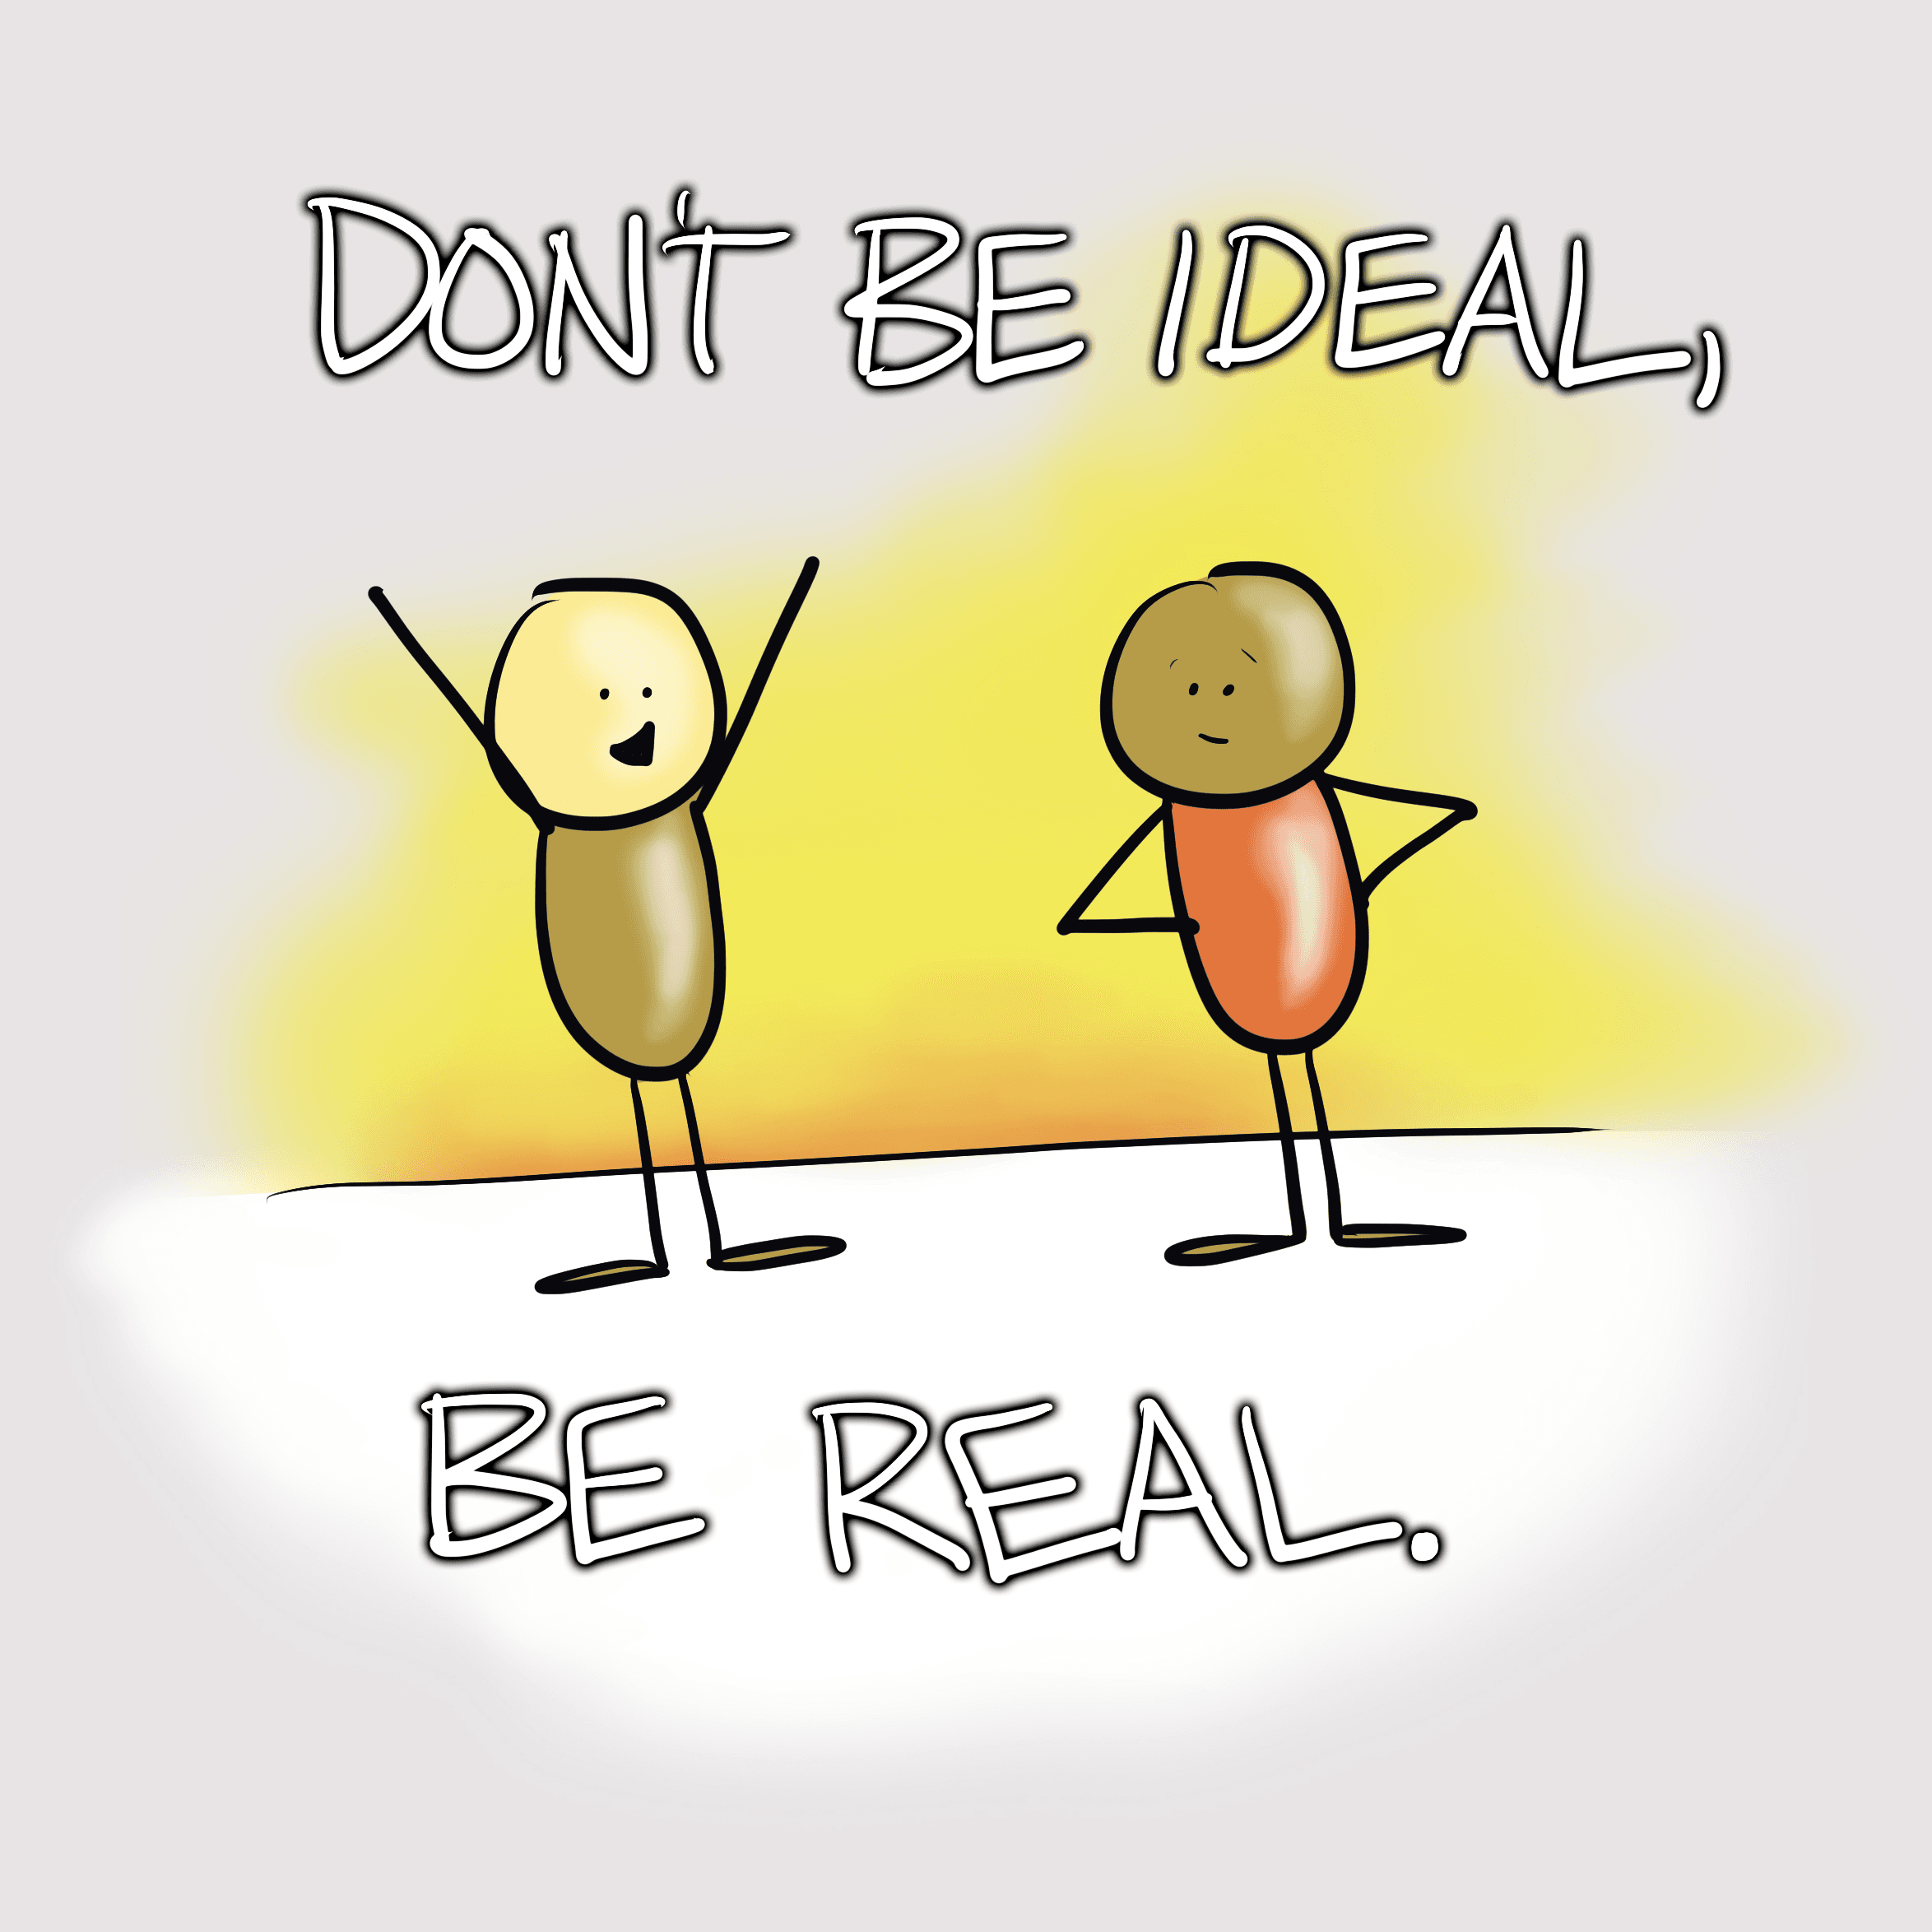 Be real